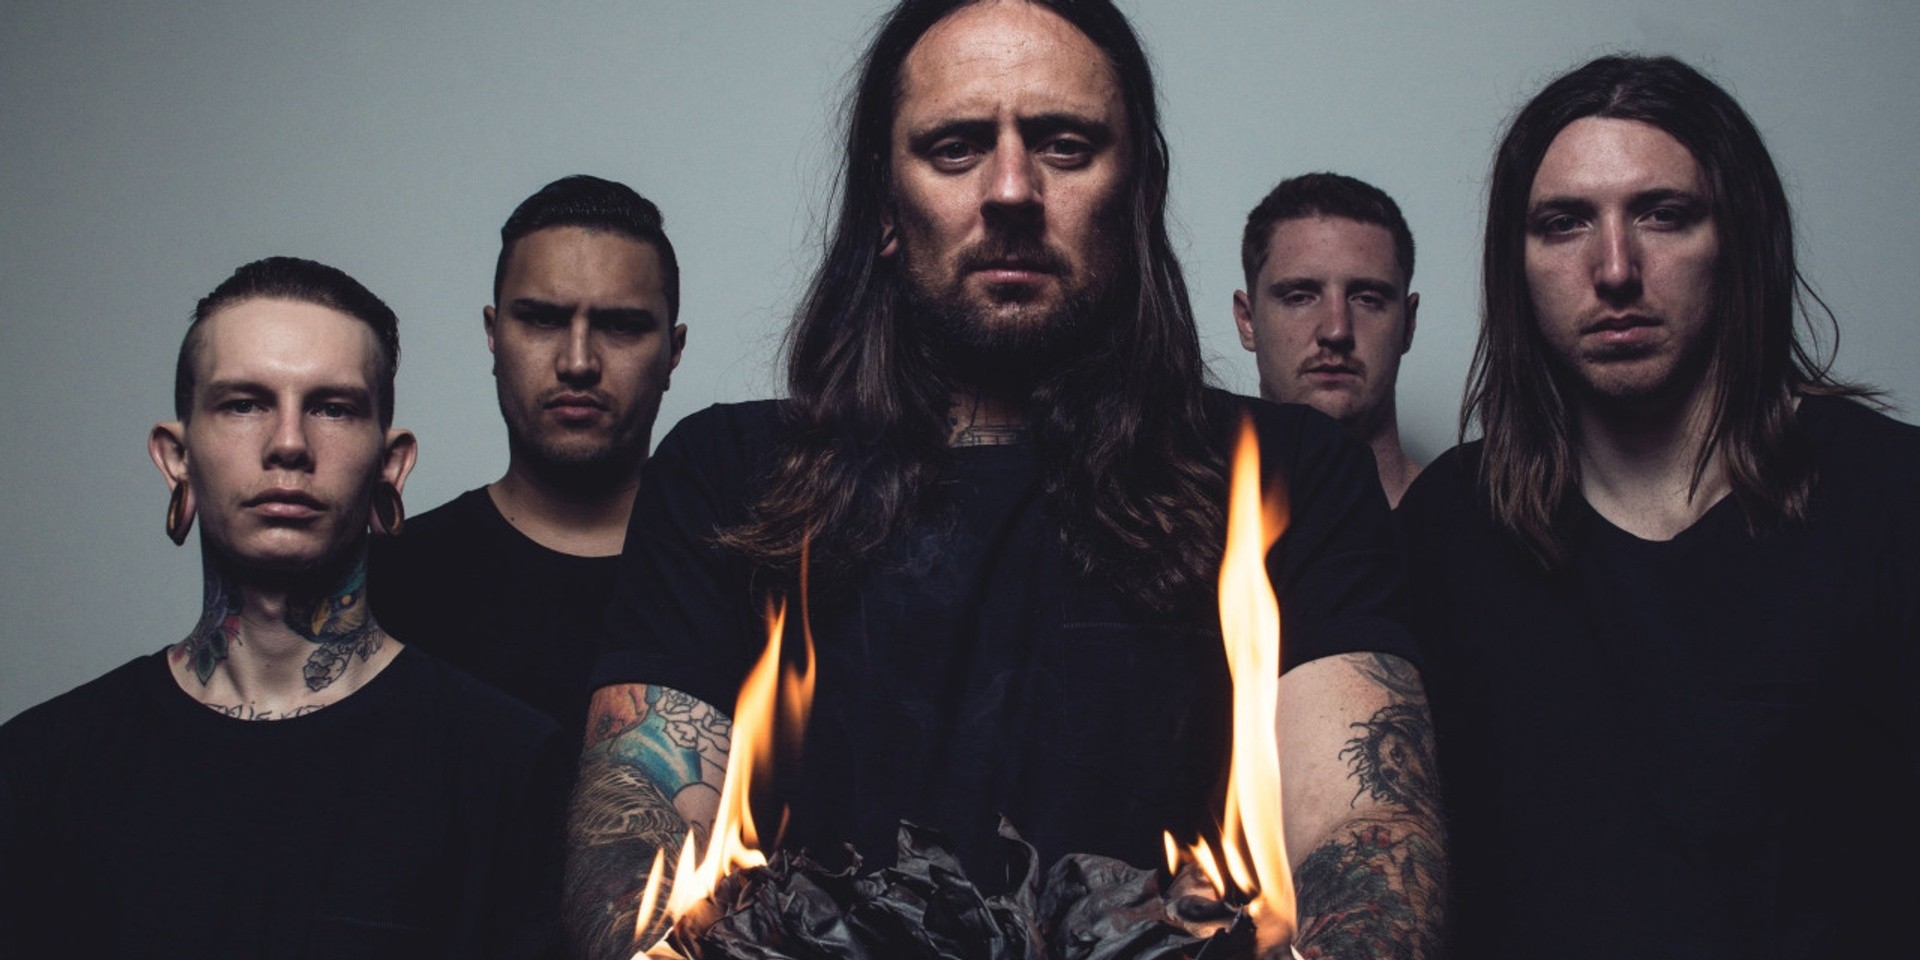 Thy Art Is Murder are coming to Singapore